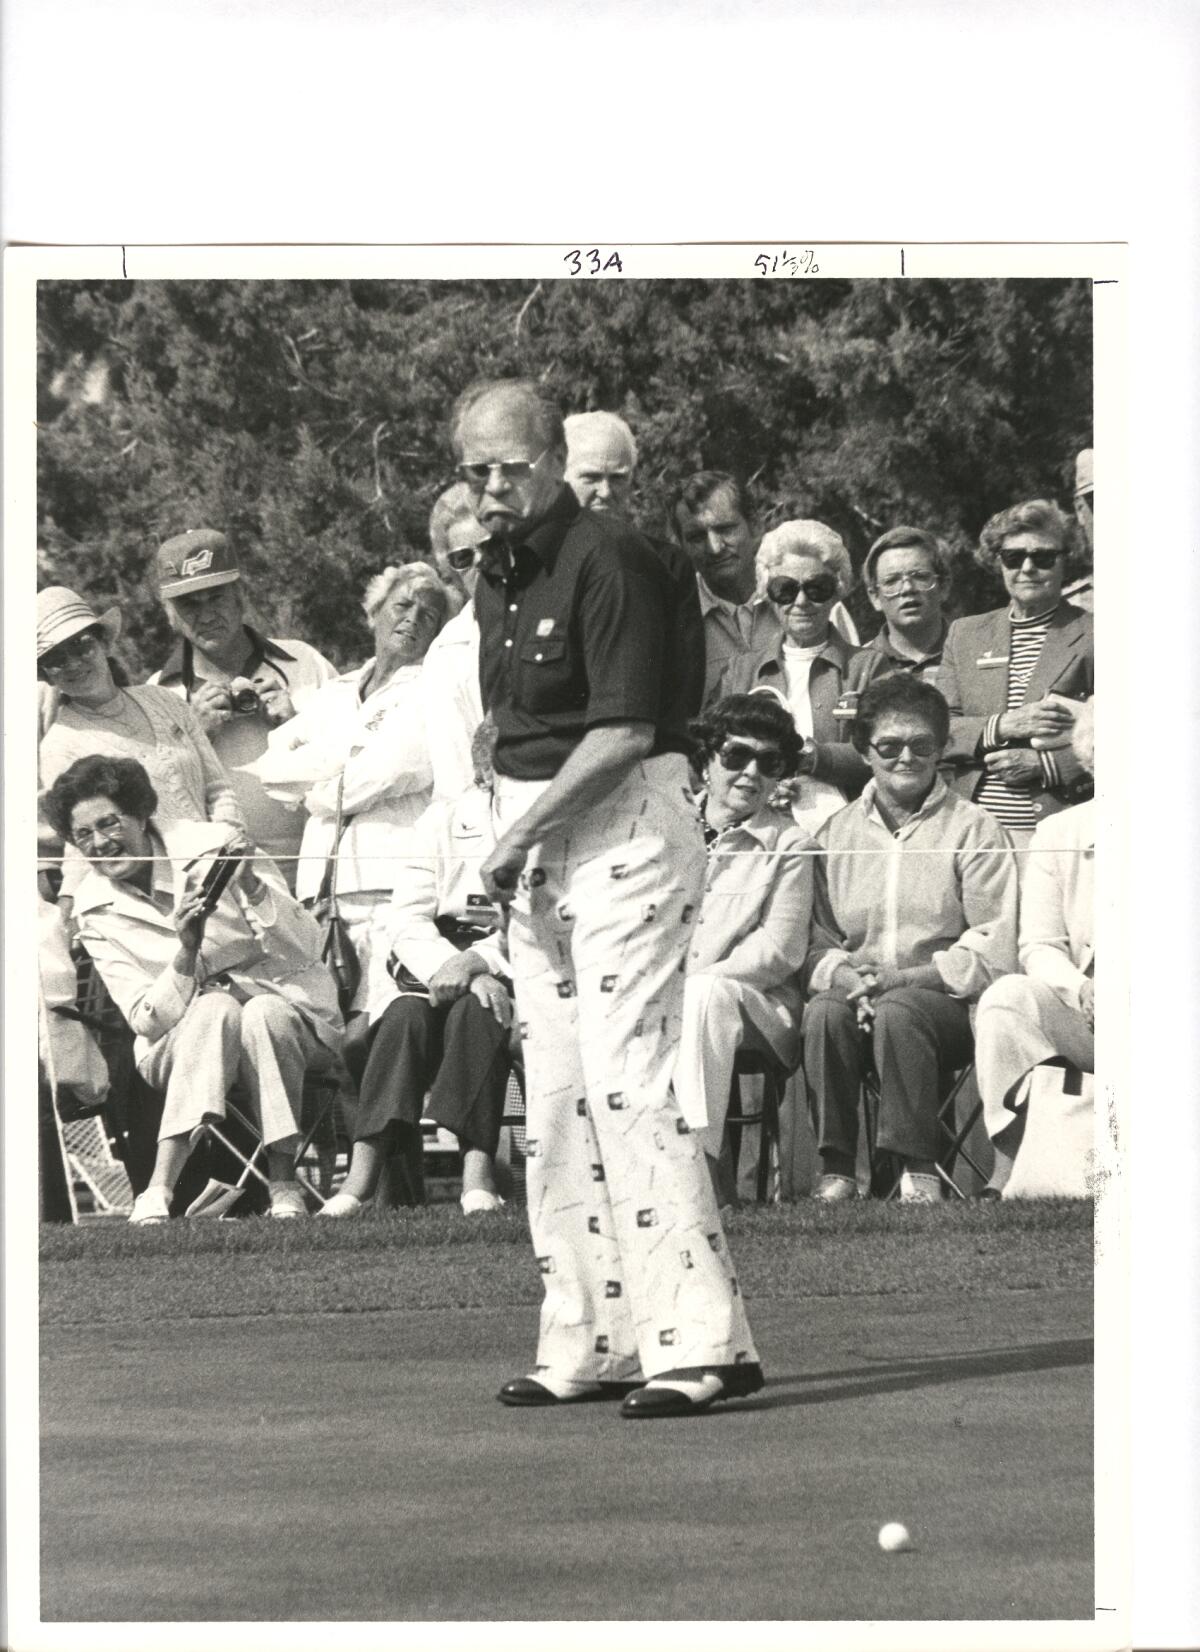 Former President Gerald Ford misses a putt at the Balboa Bay Club in 1977.